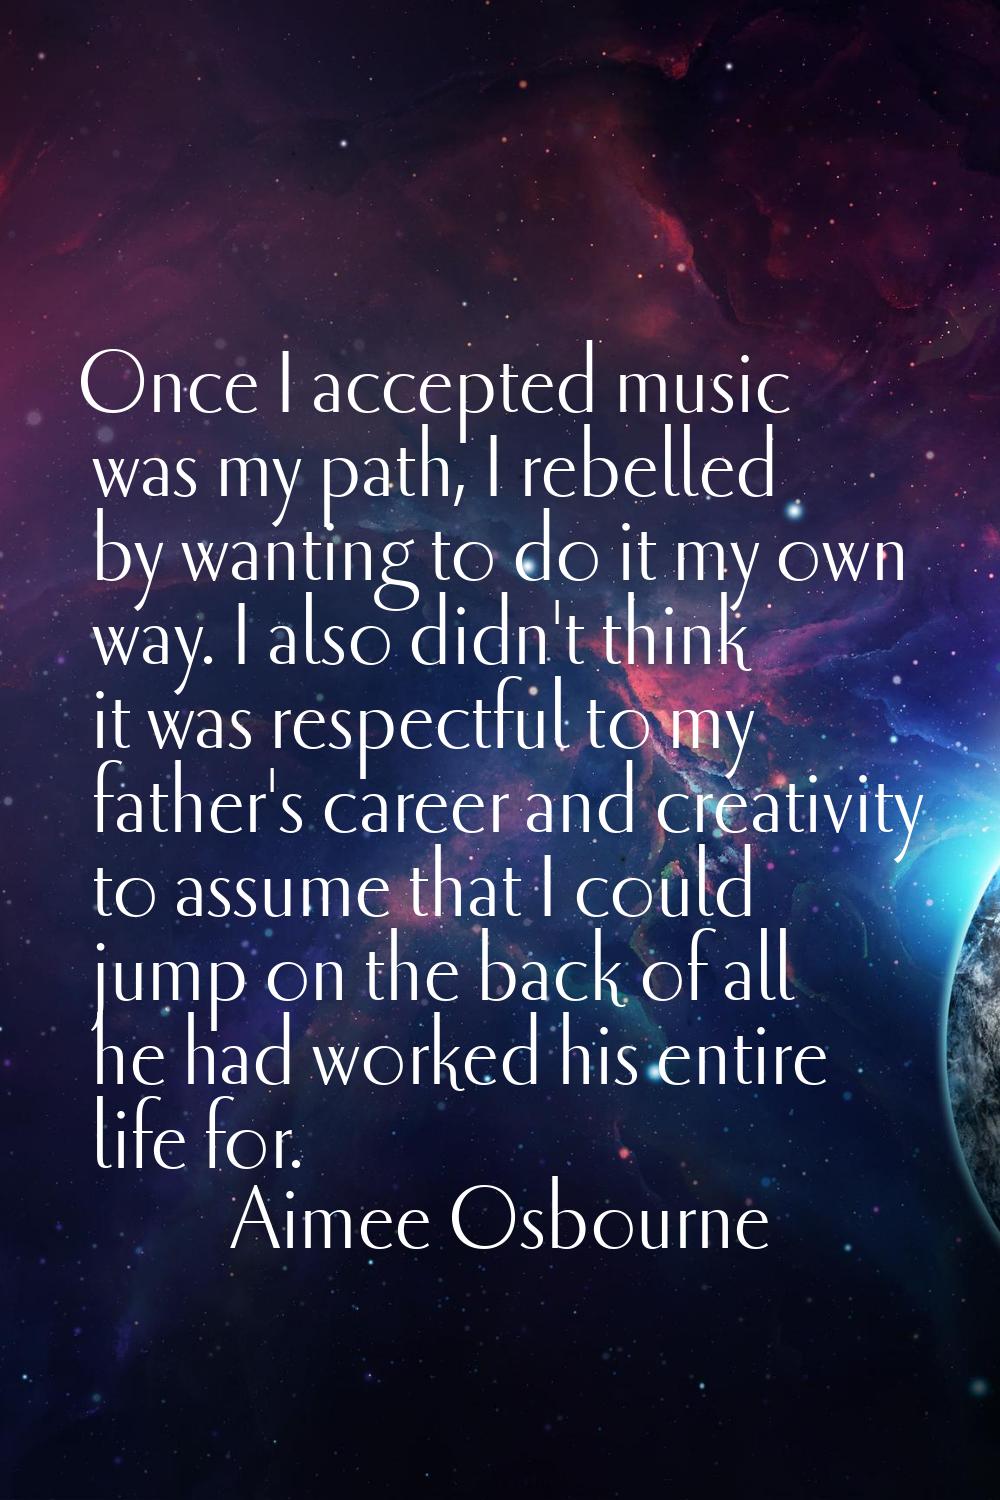 Once I accepted music was my path, I rebelled by wanting to do it my own way. I also didn't think i